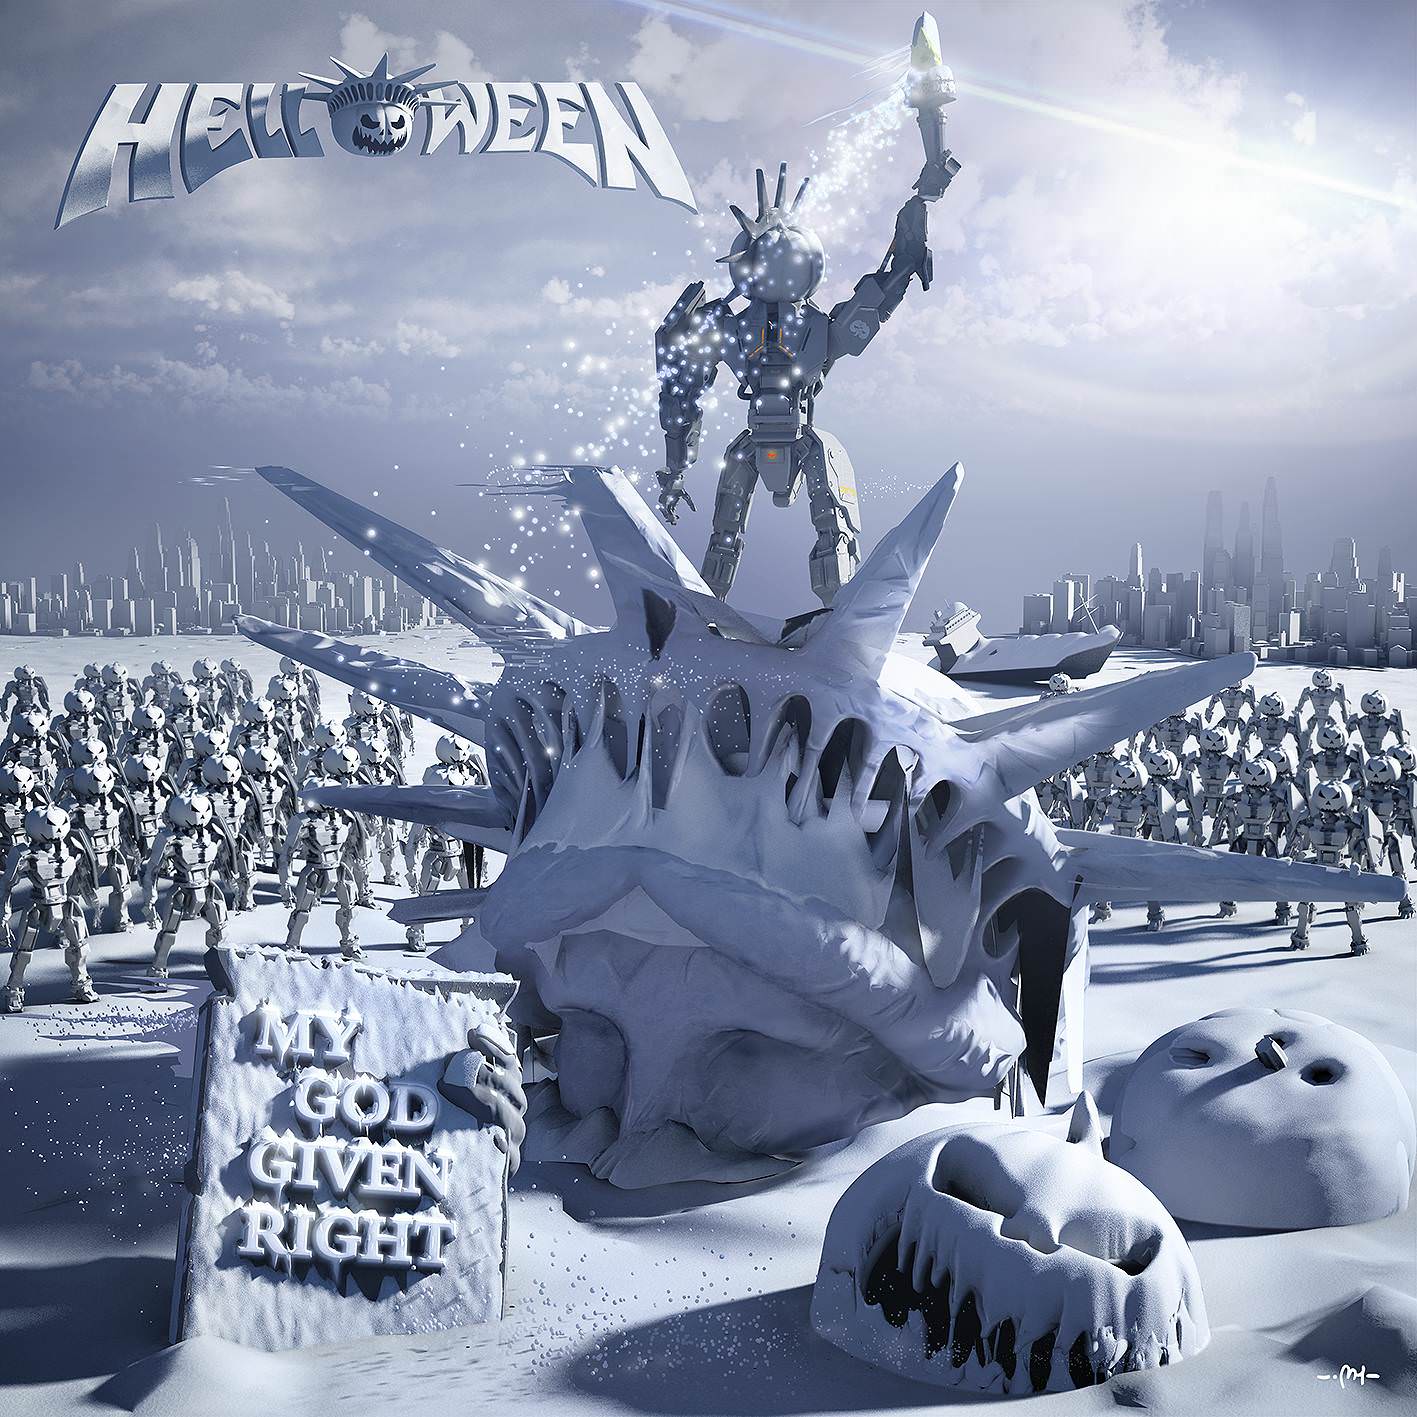 Helloween – My God-Given Right {Deluxe Edition} (2015/2018) [Qobuz FLAC 24bit/96kHz]